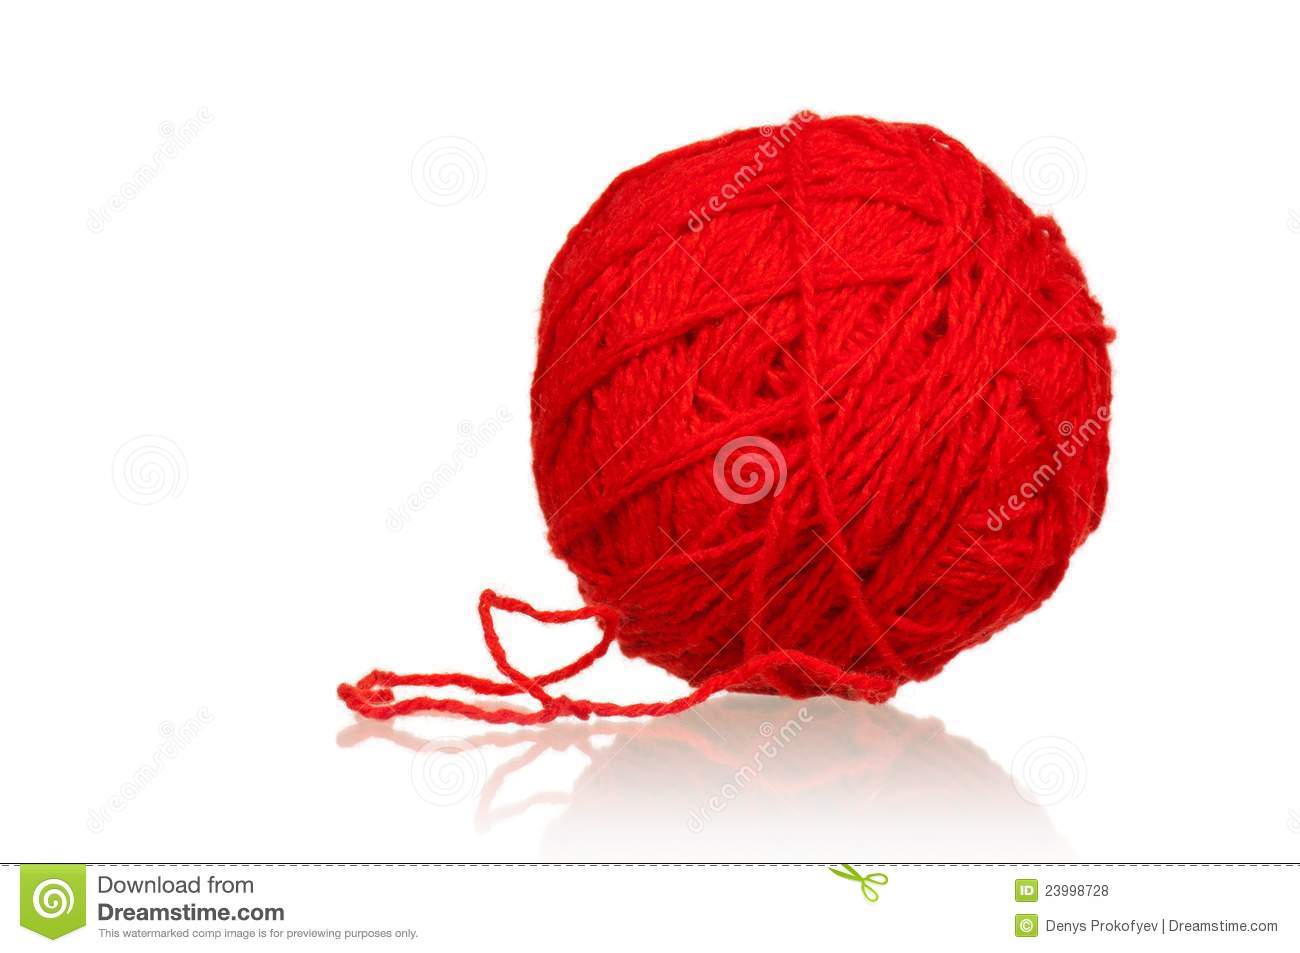 Red Ball Of Yarn Royalty Free Stock Photos   Image  23998728